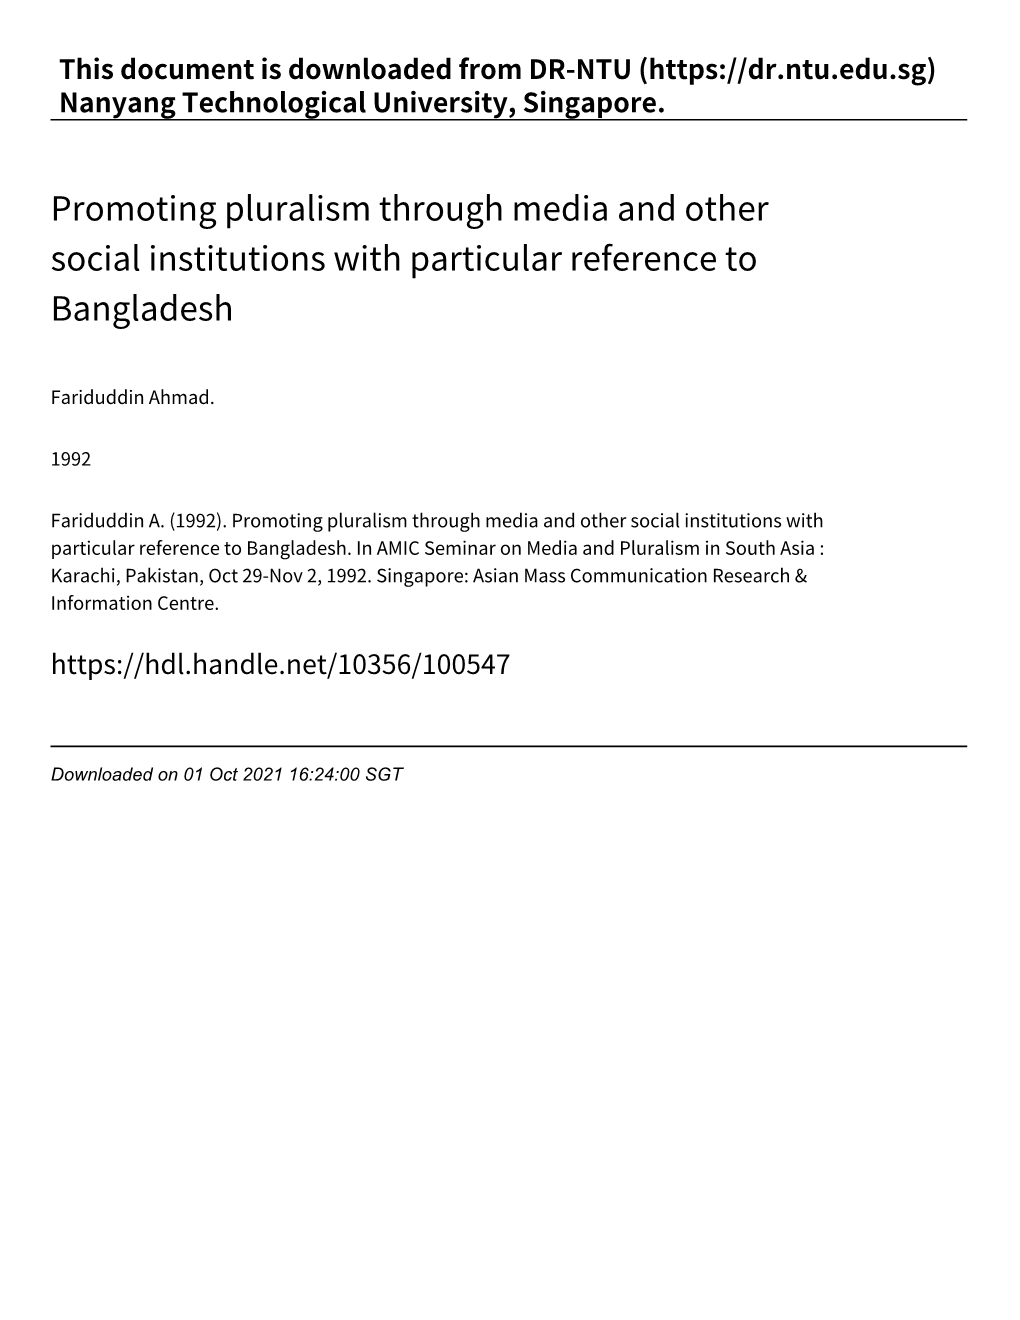 Promoting Pluralism Through Media and Other Social Institutions with Particular Reference to Bangladesh